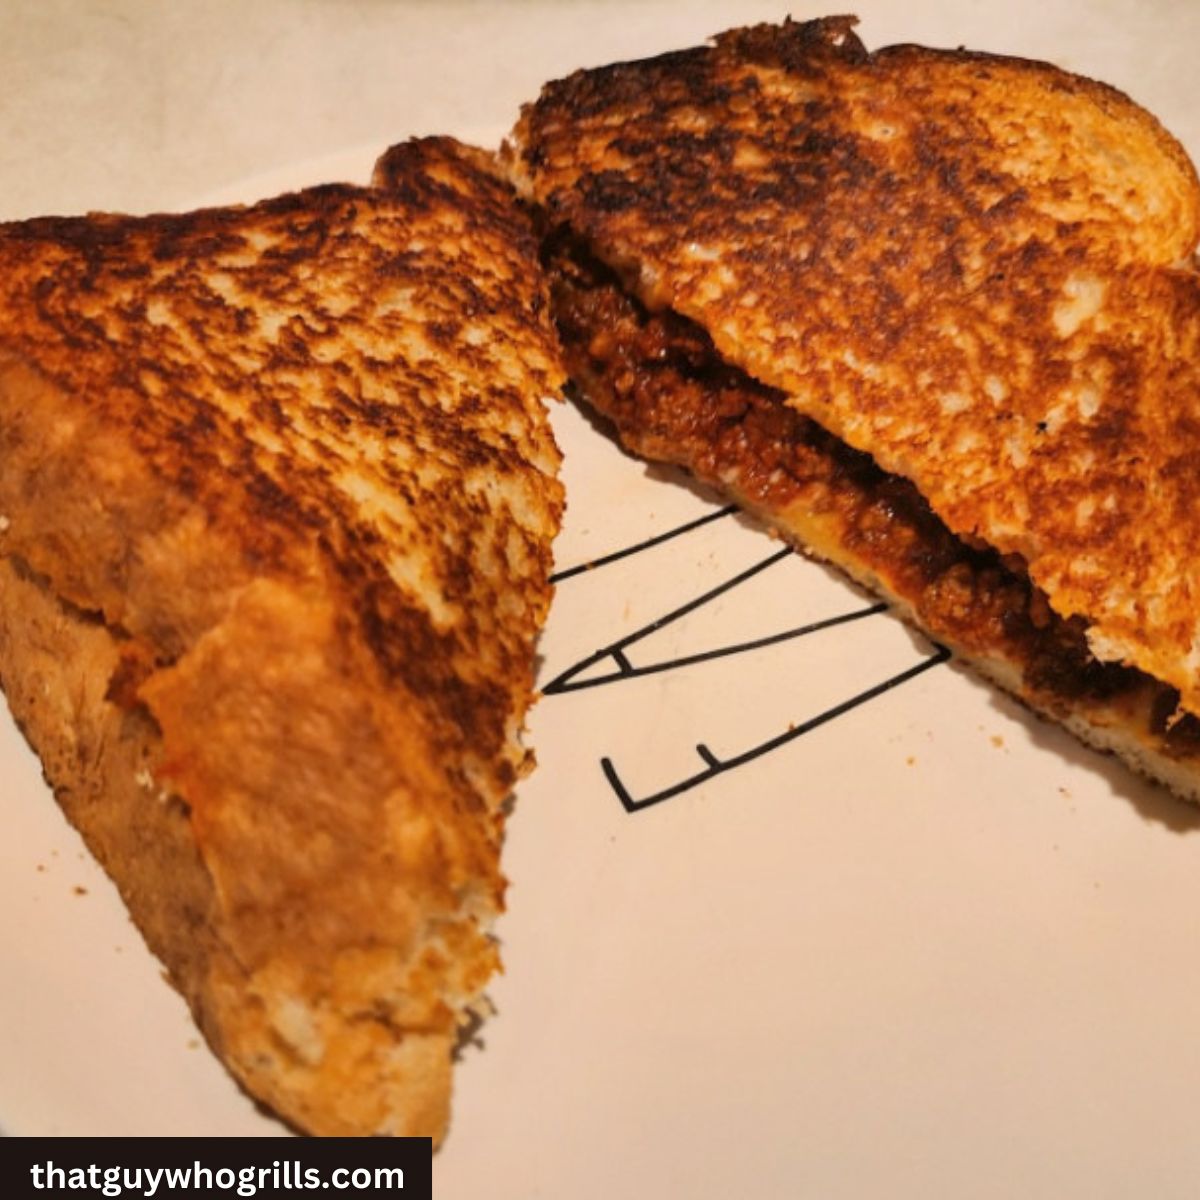 Sloppy Joe Grilled Cheese Sandwich Served On White Plate